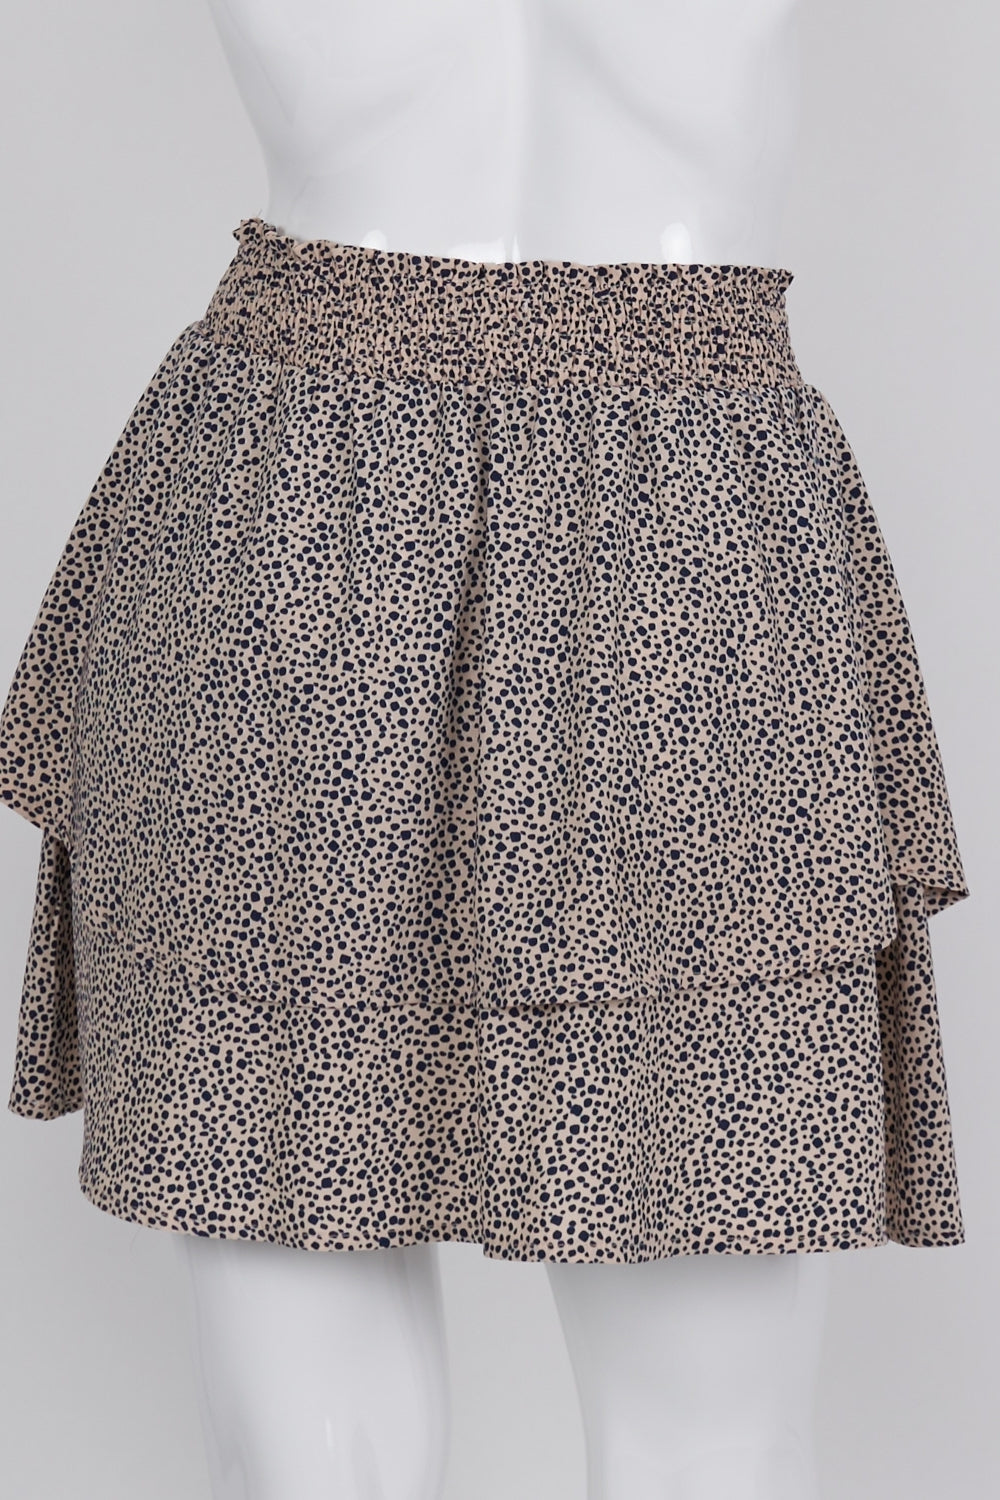 Grace & Co Pink Patterned Layered Skirt 12